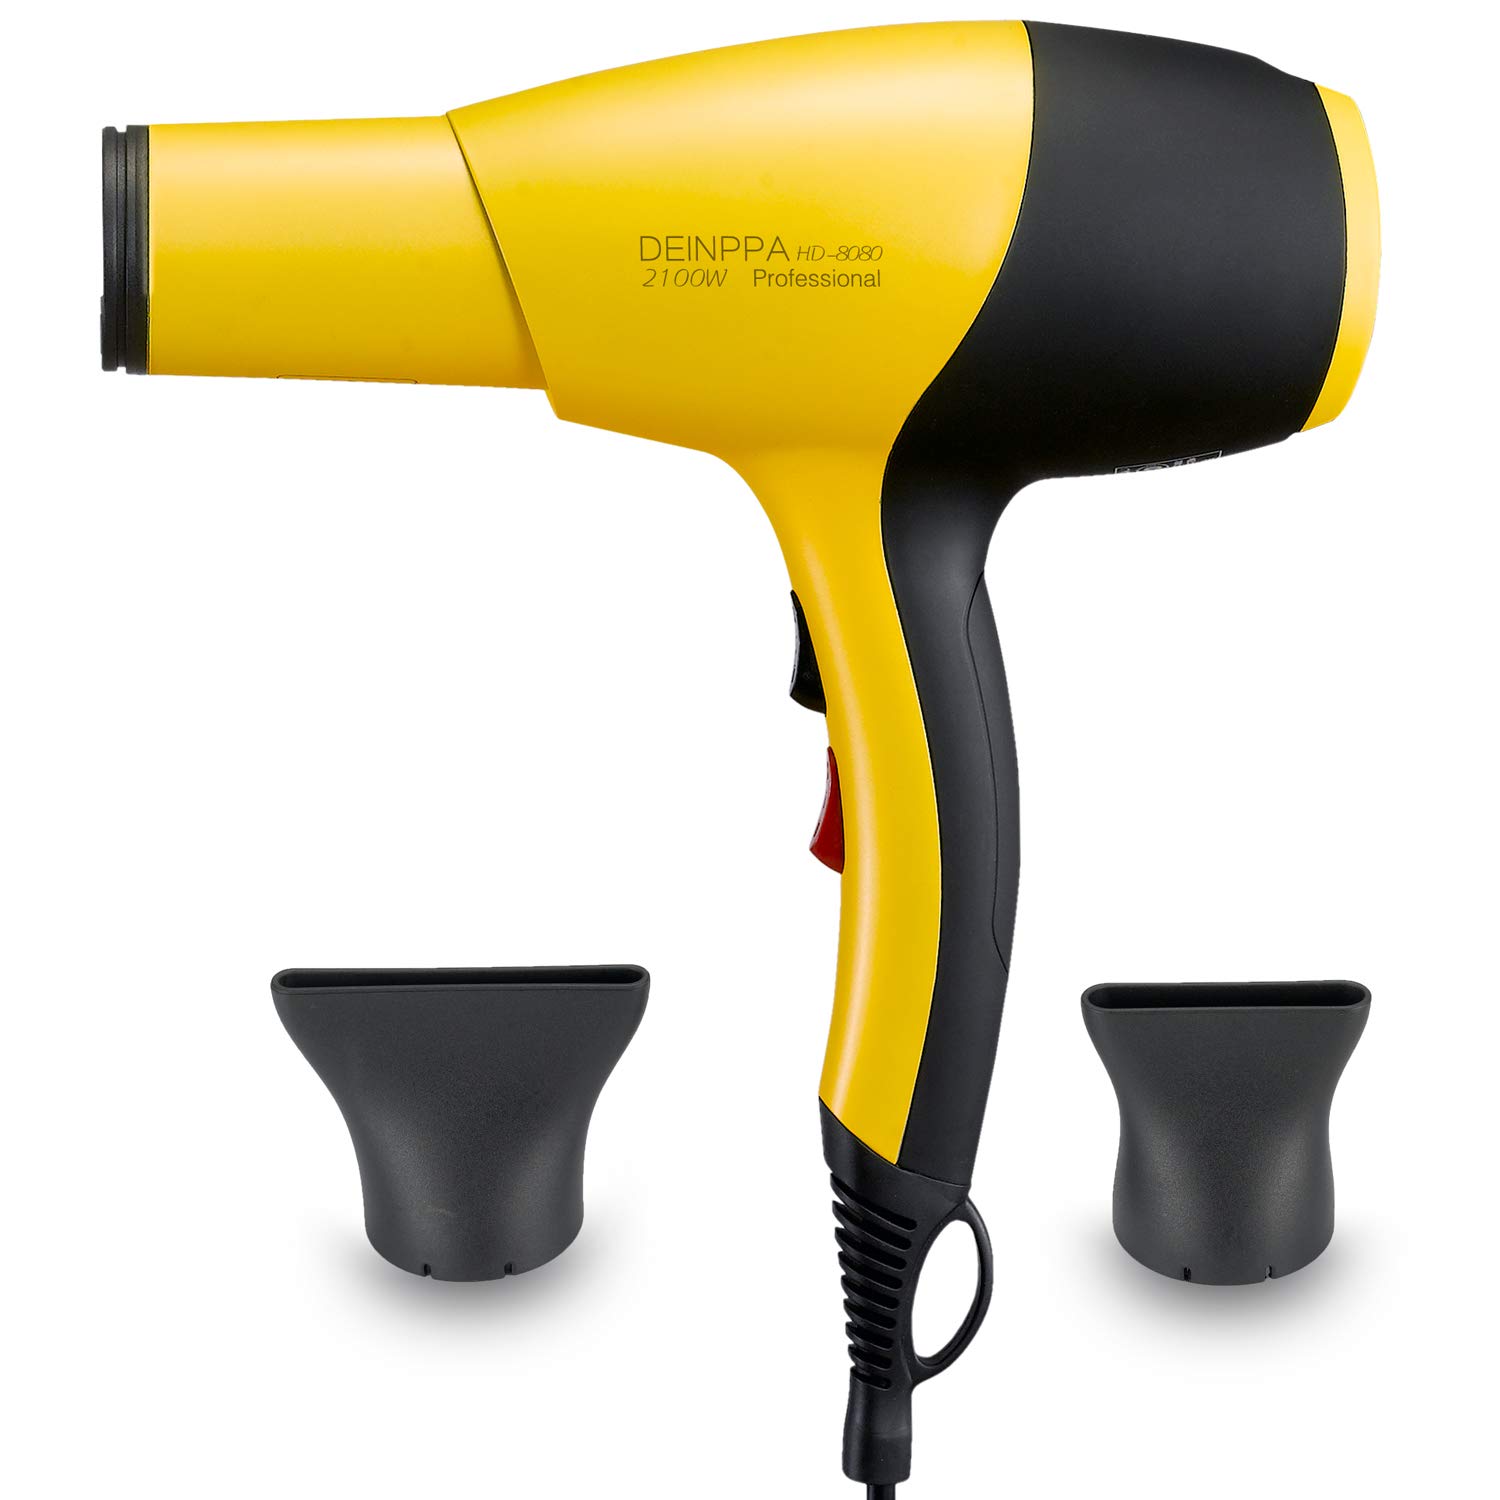 The Best Powerful Hair Dryer of 2023